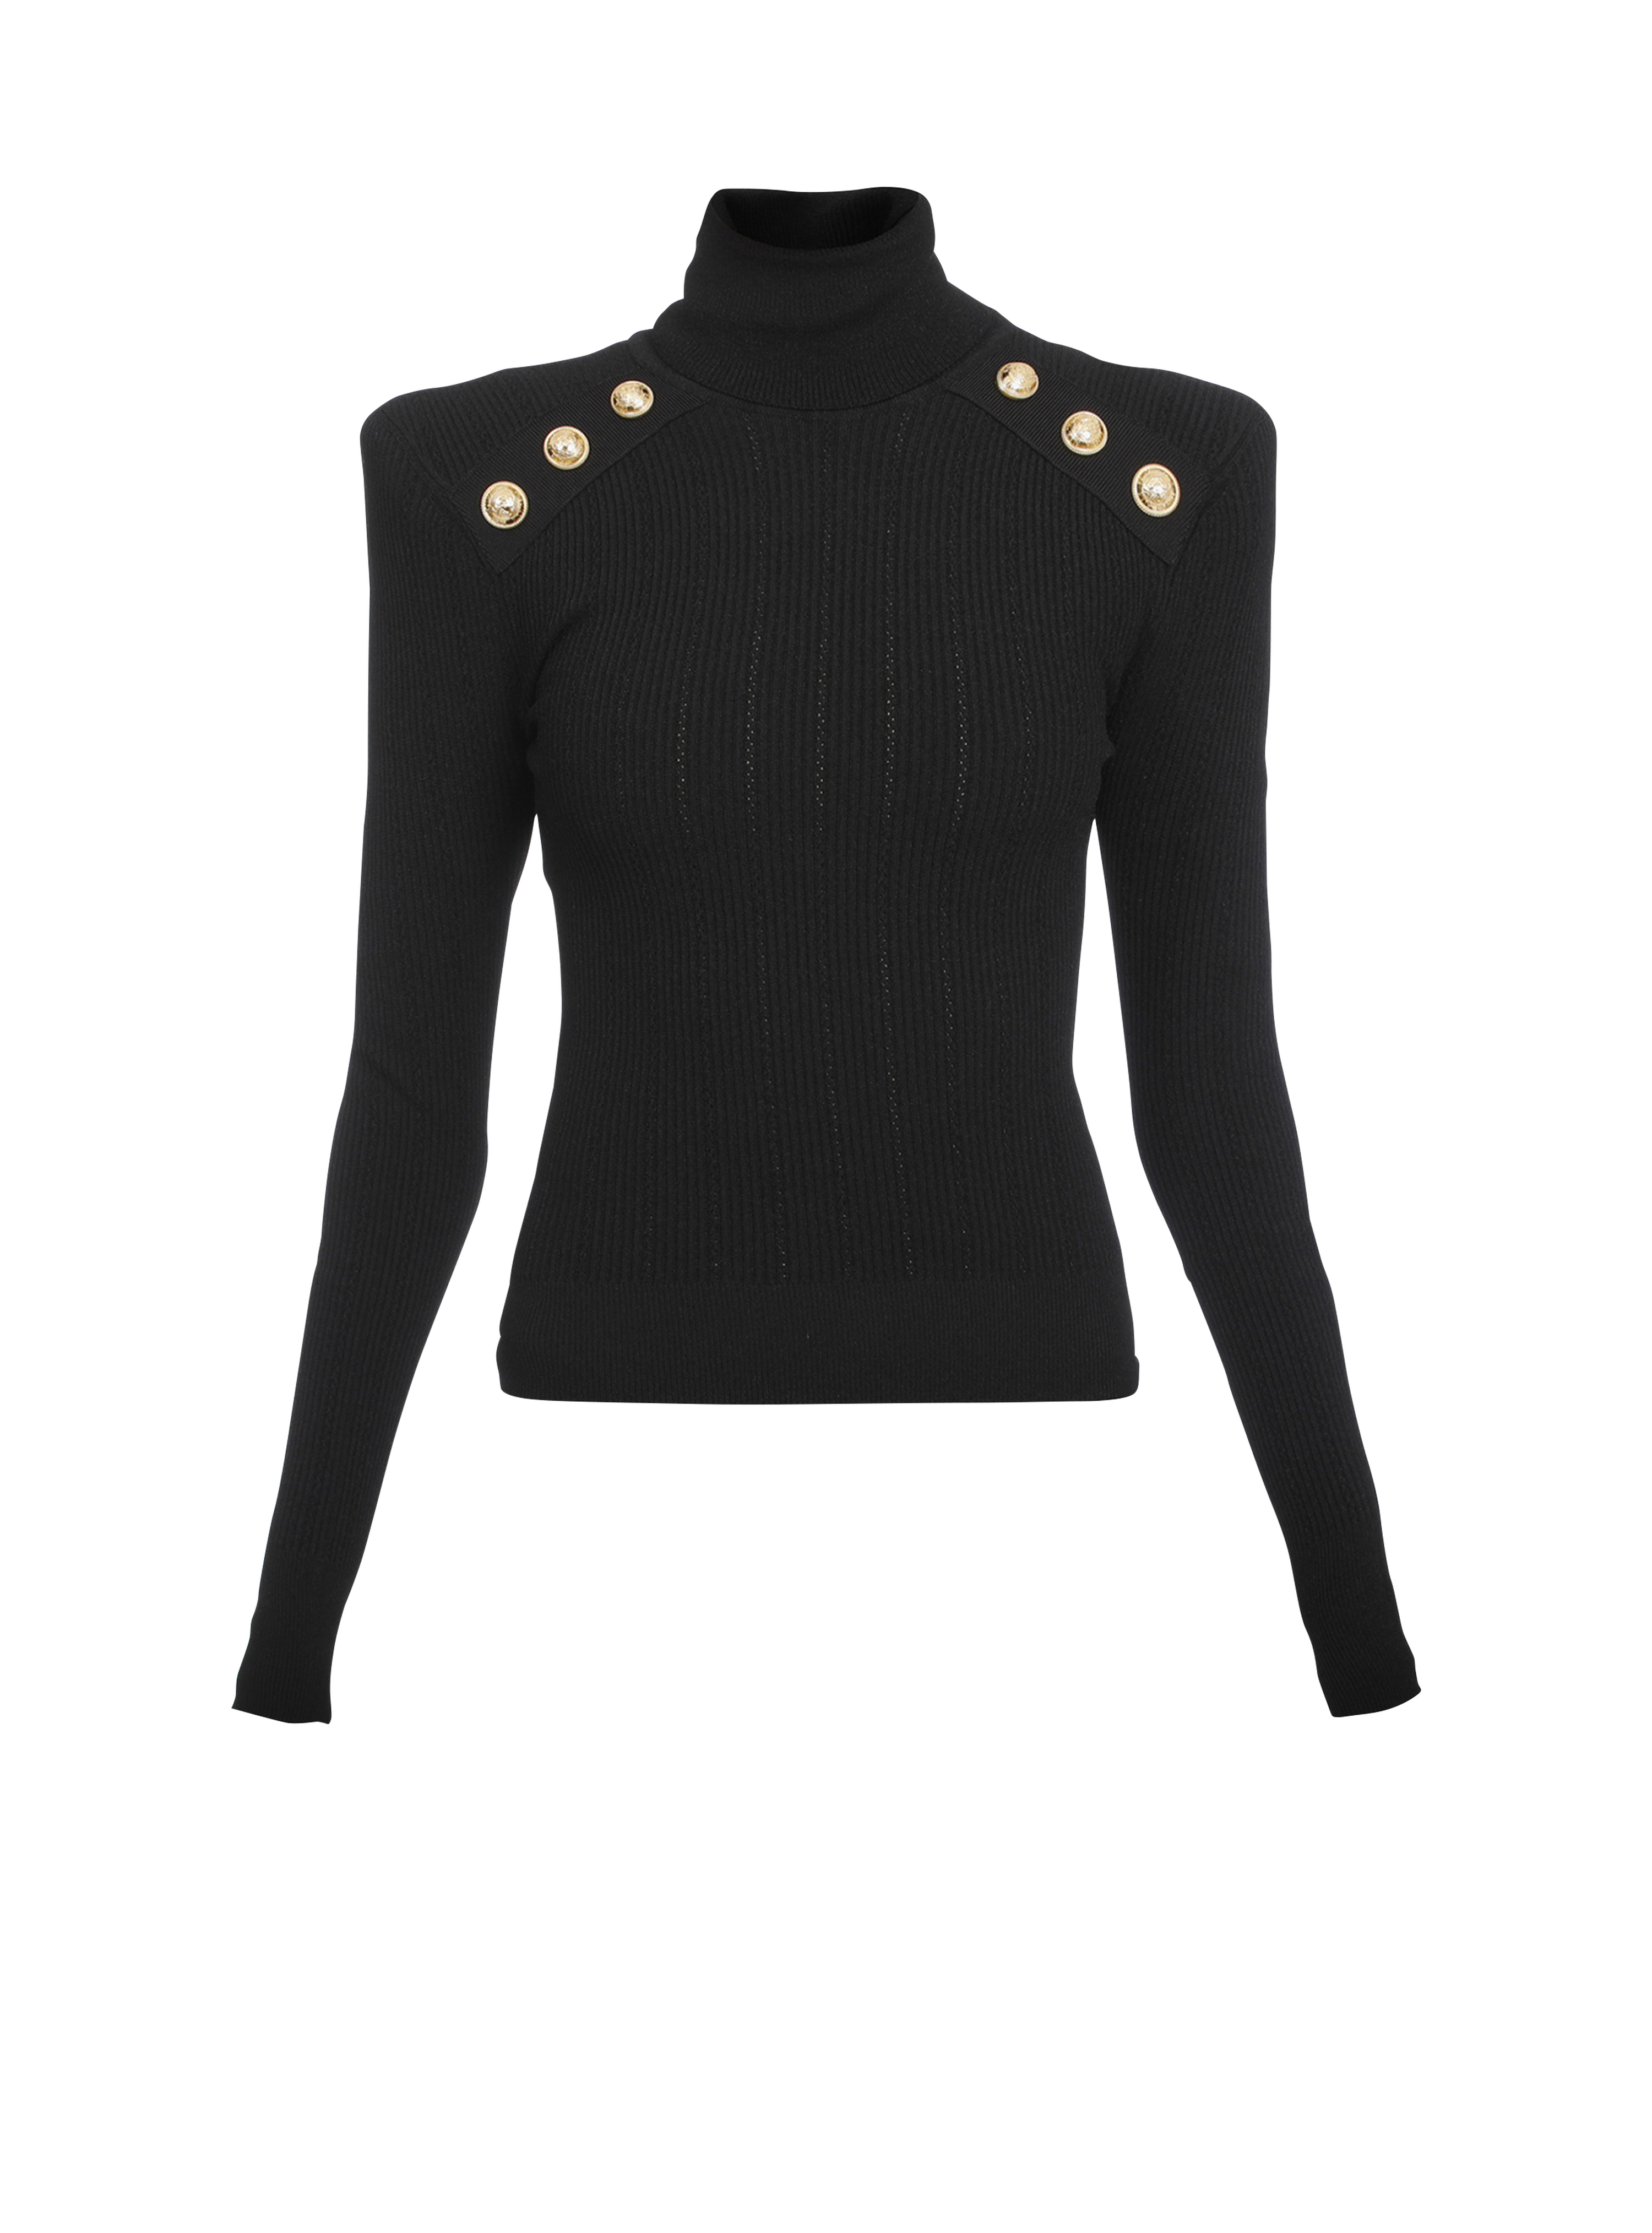 Knit sweater with gold-tone buttons, black